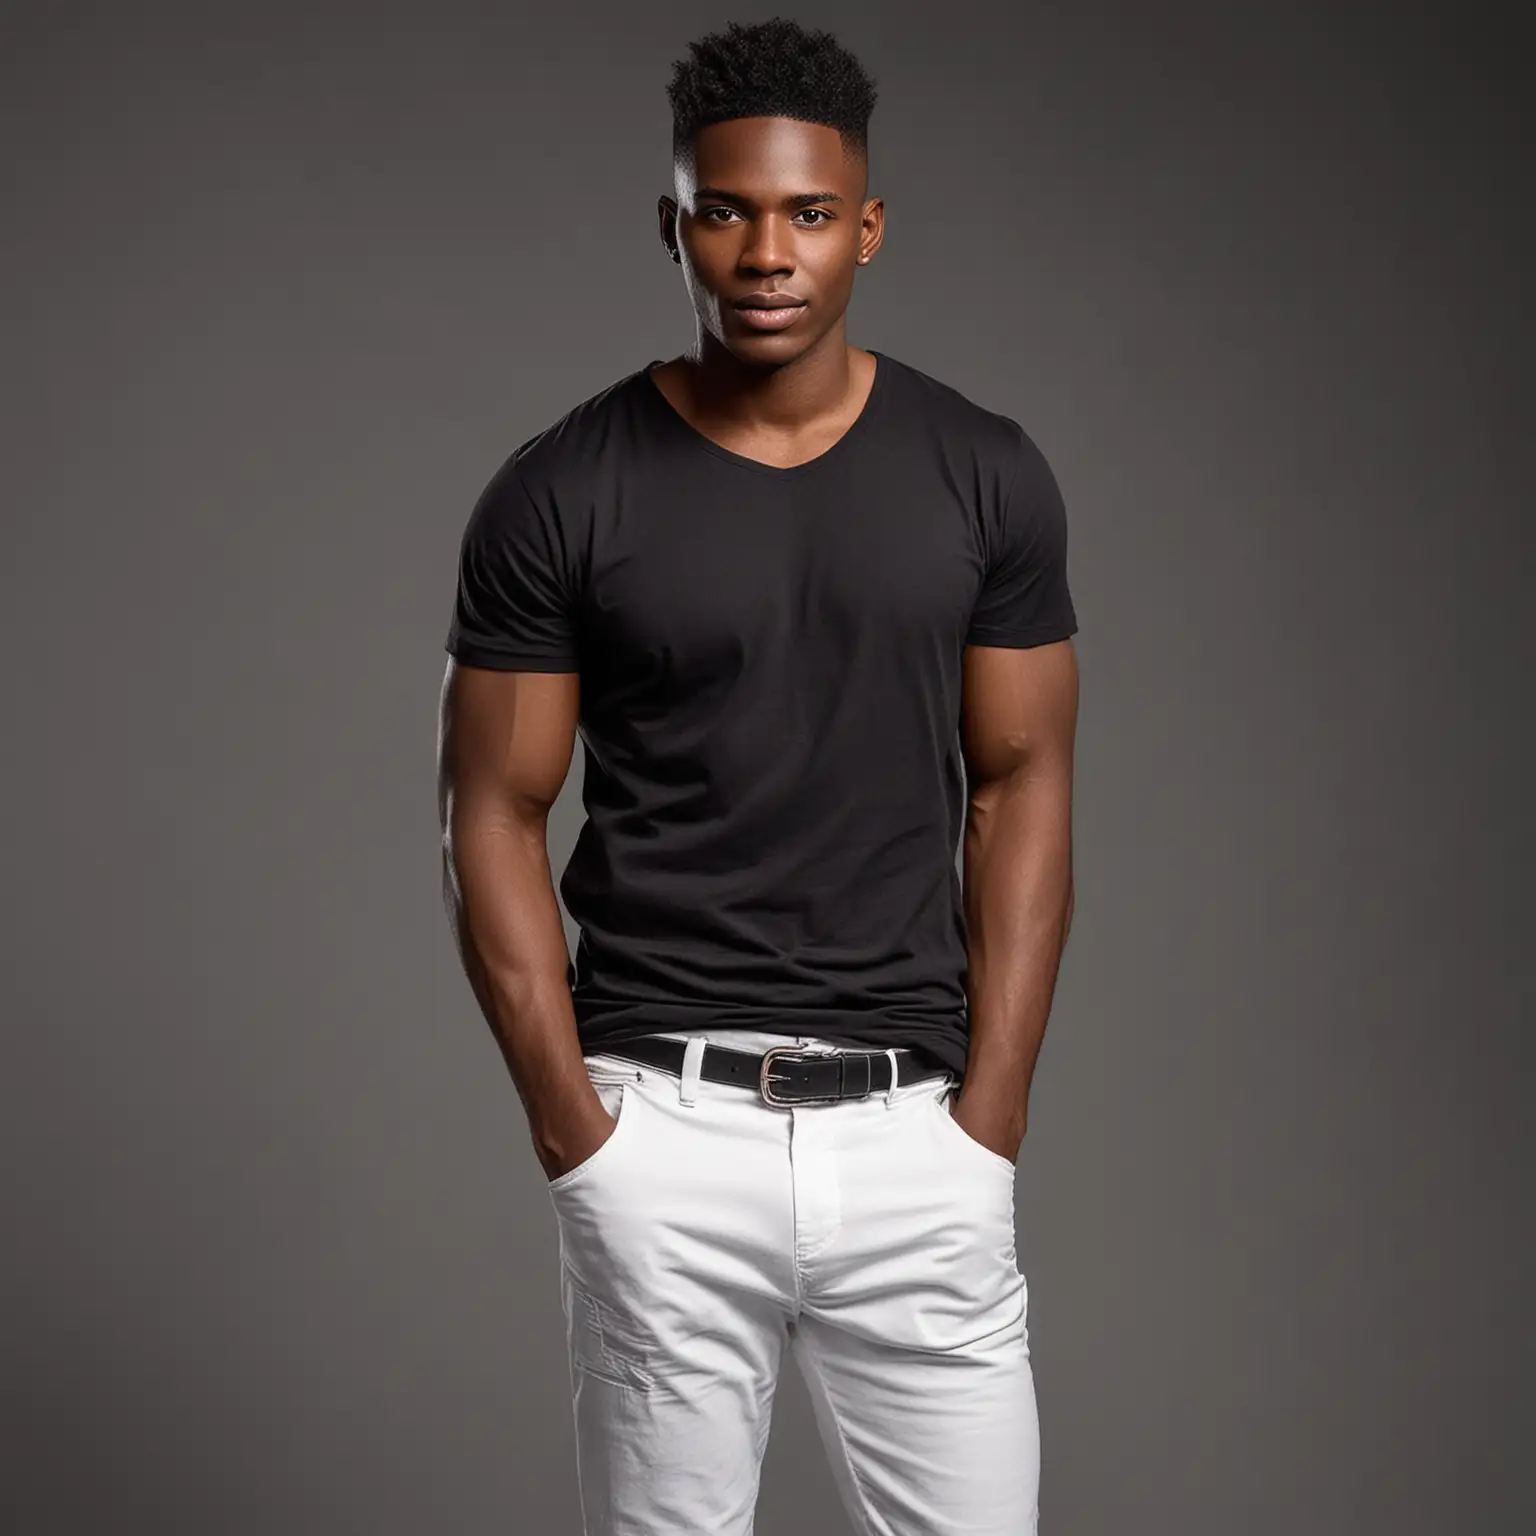 Handsome Bahamian Male Model in White Pants and Black TShirt